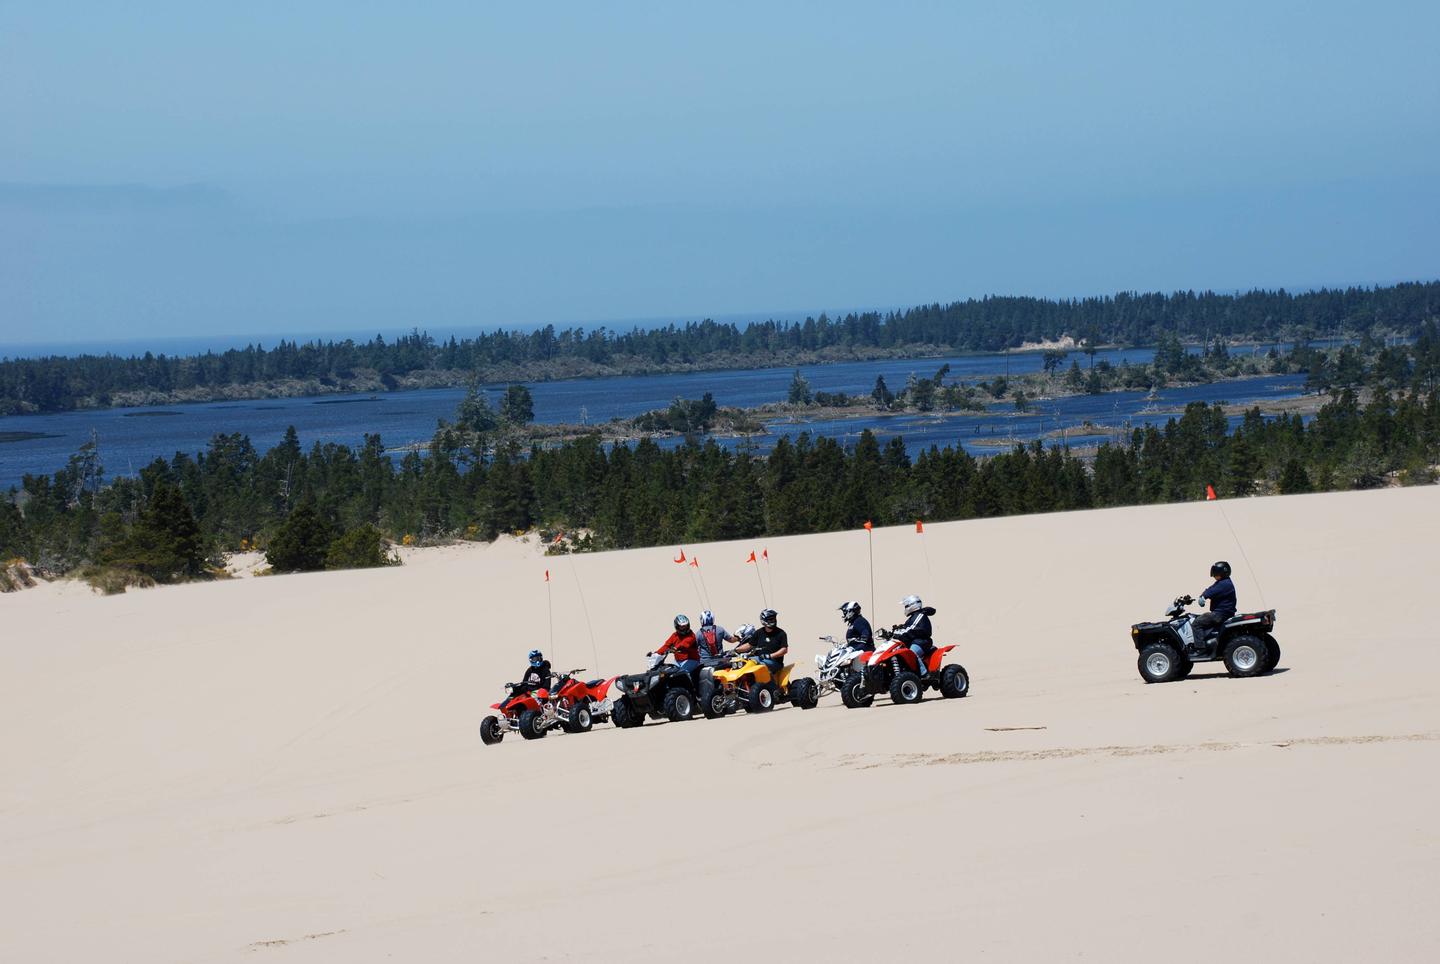 Off road vehicles on flat expanse of sand in front of blue lake ringed by conifer trees.The dunes near Horsfall Campground